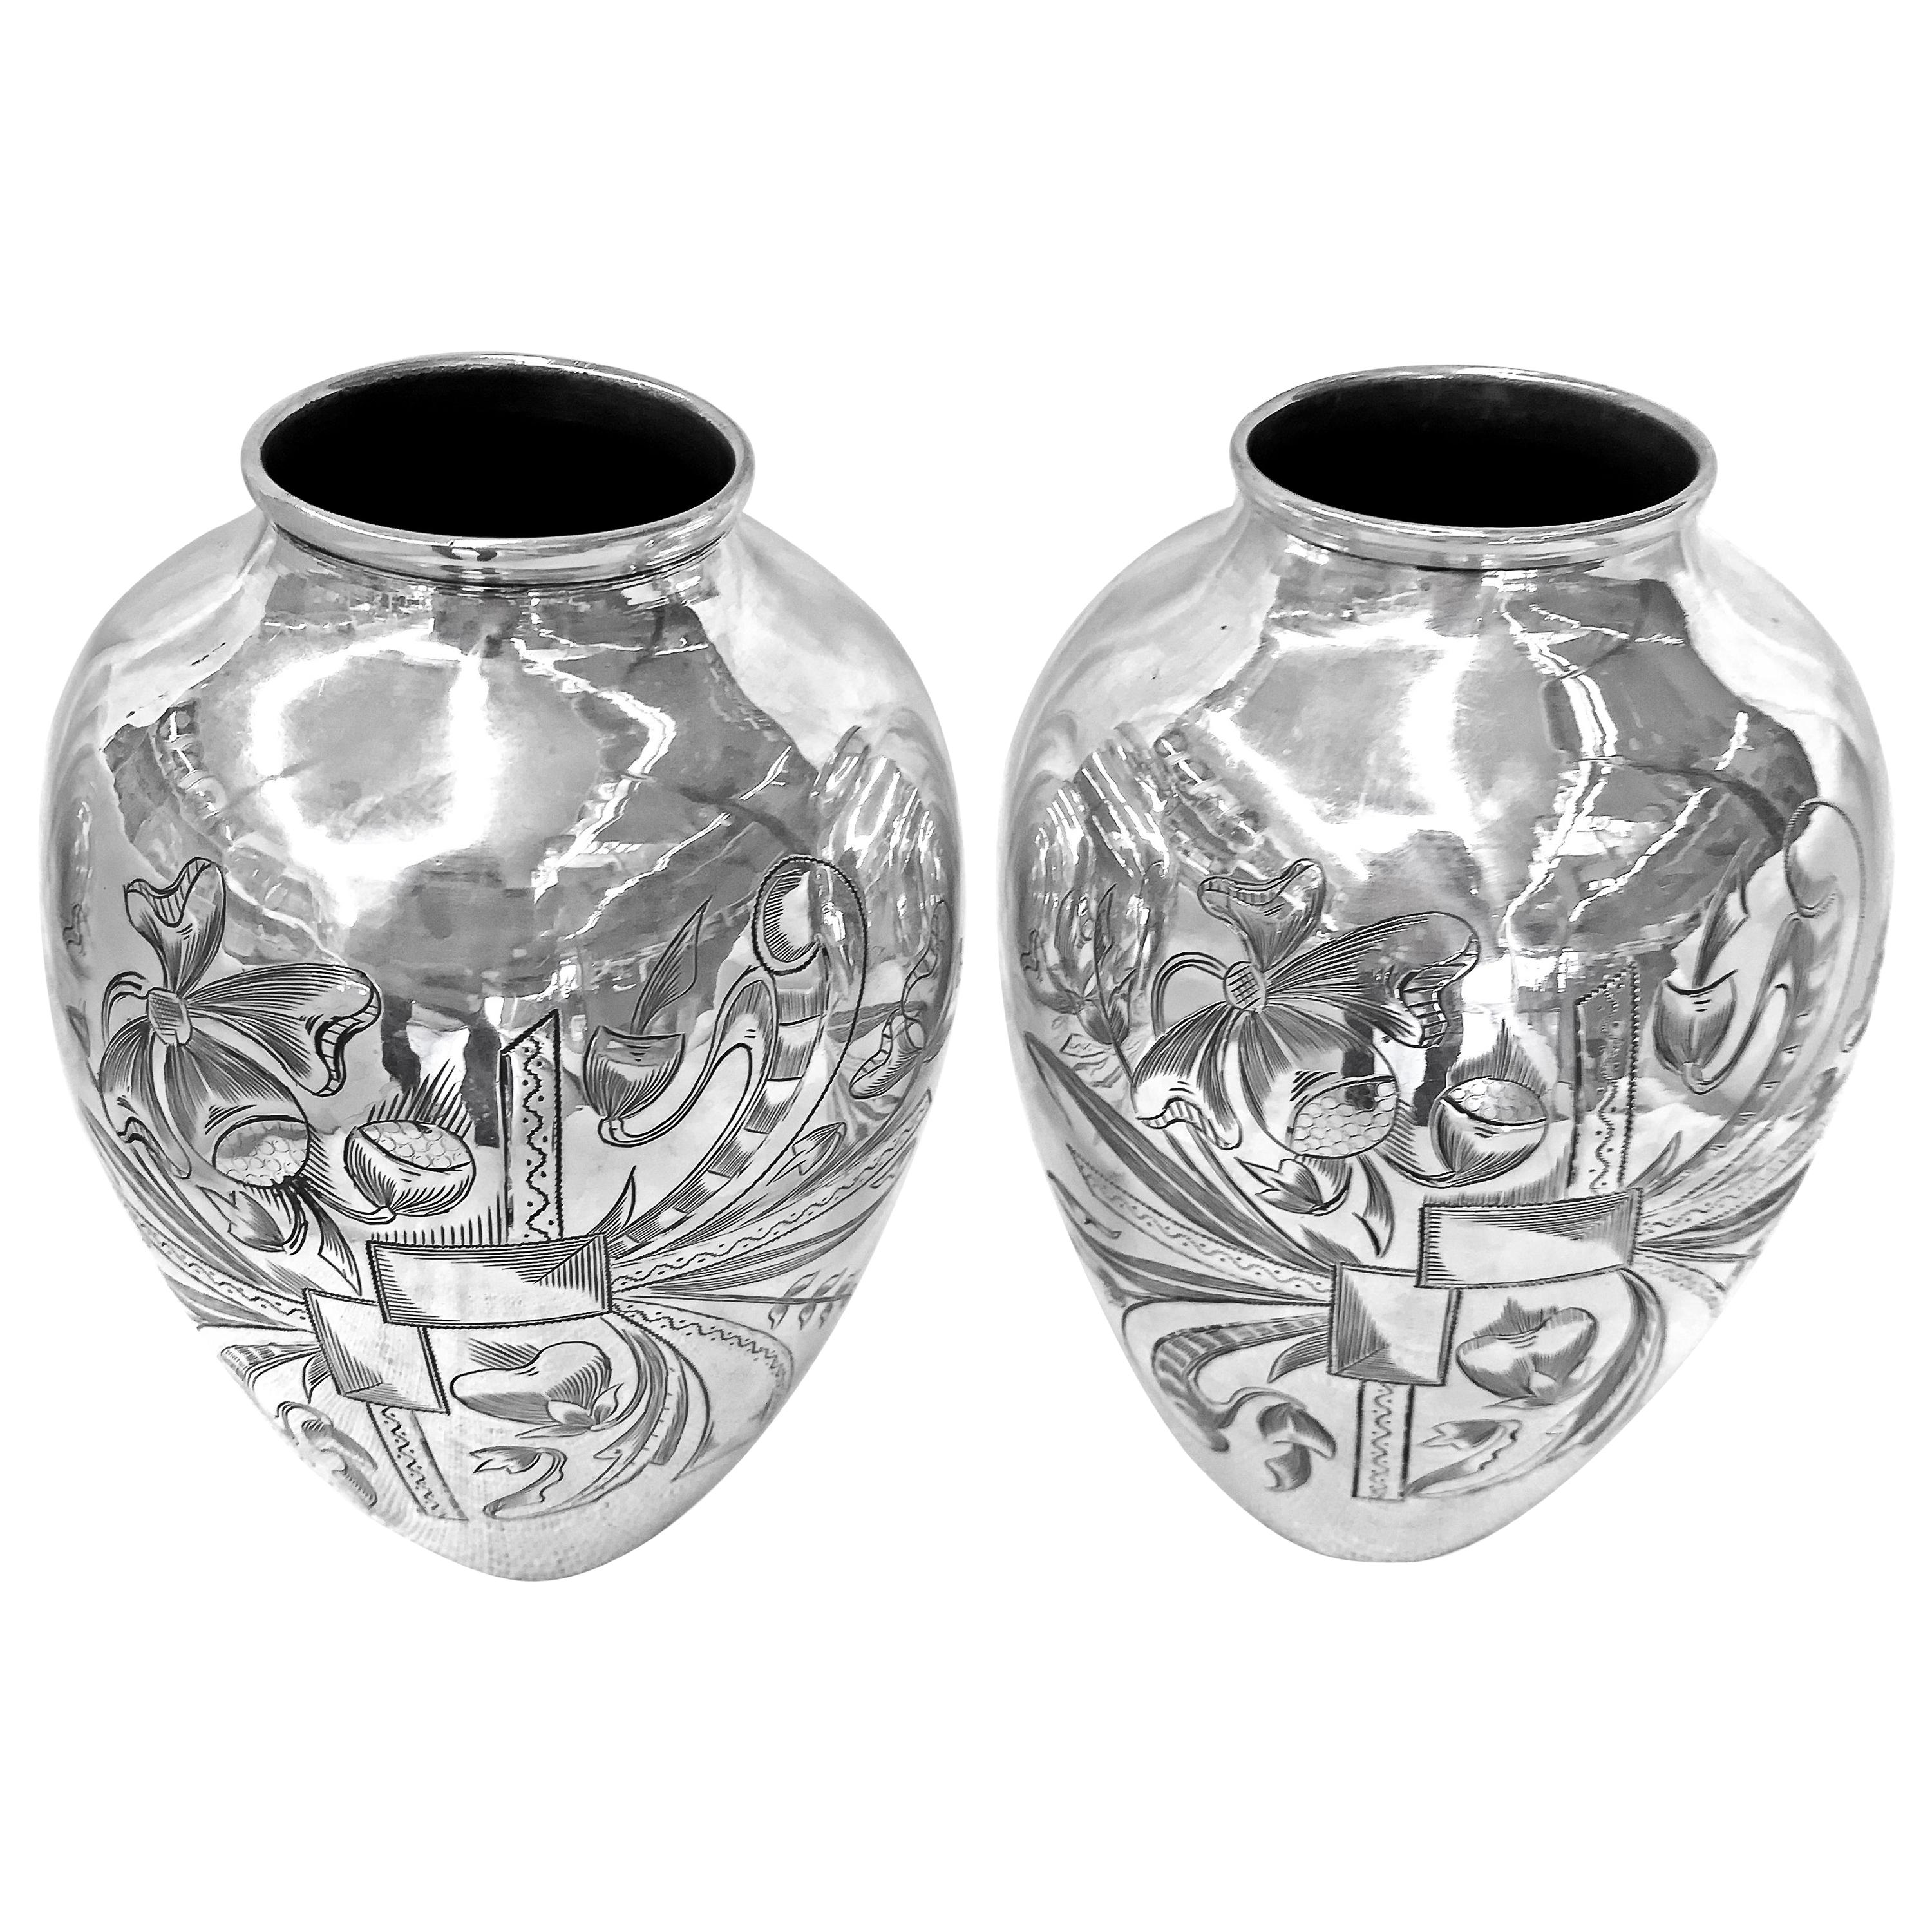 Old Unique Vase Hand Engraved Delicately, One Pair For Sale